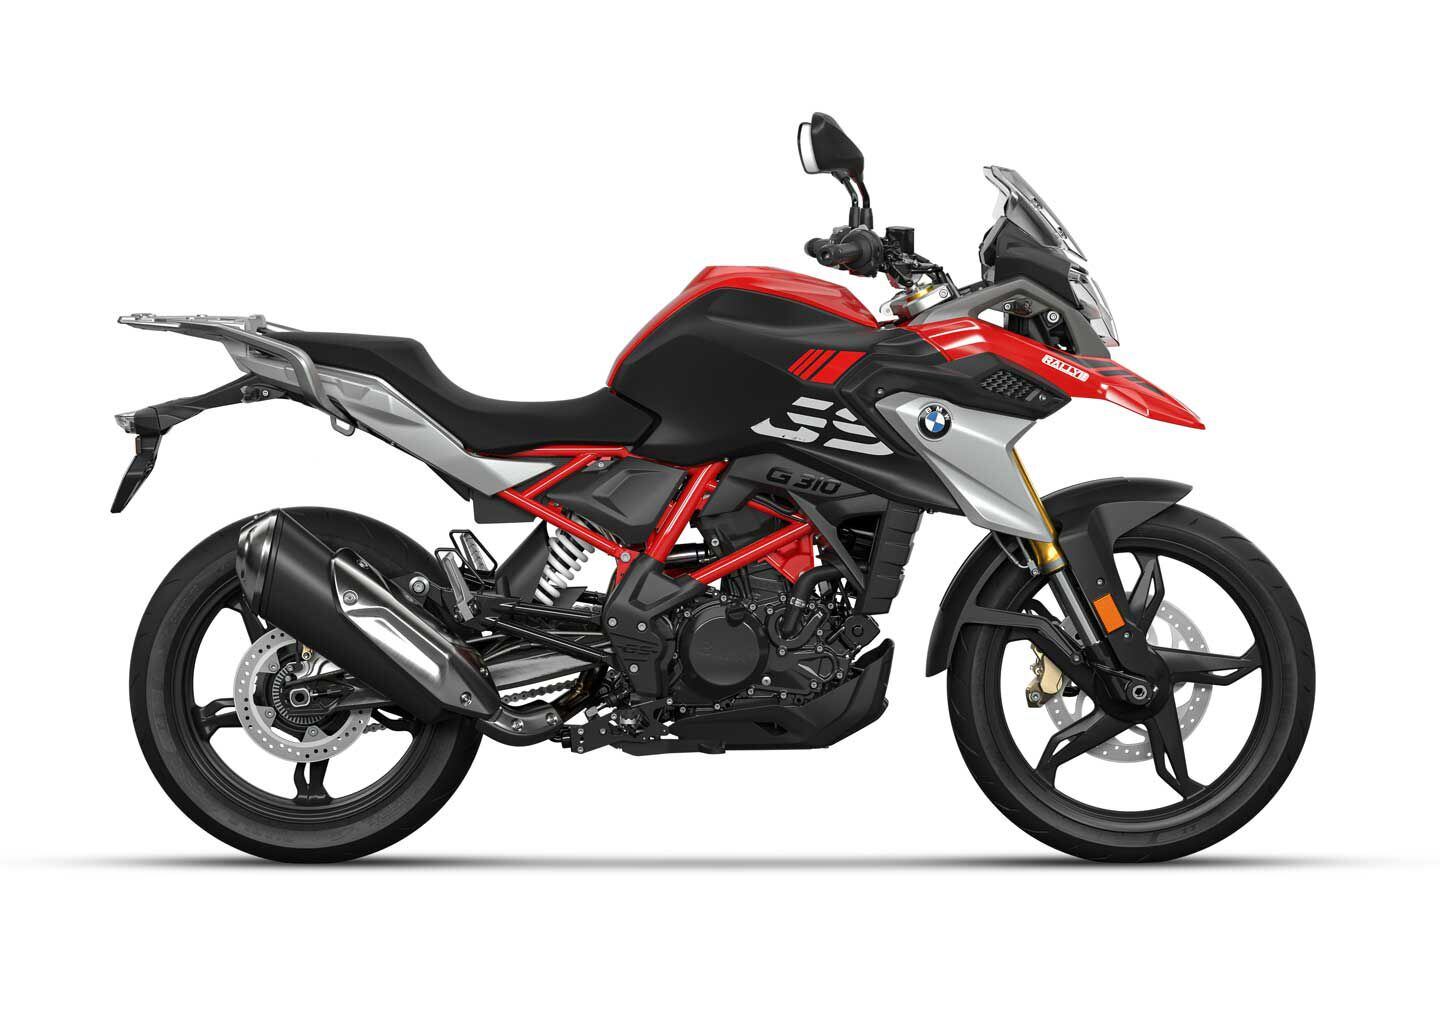 2024 BMW G 310 GS in Racing Red.